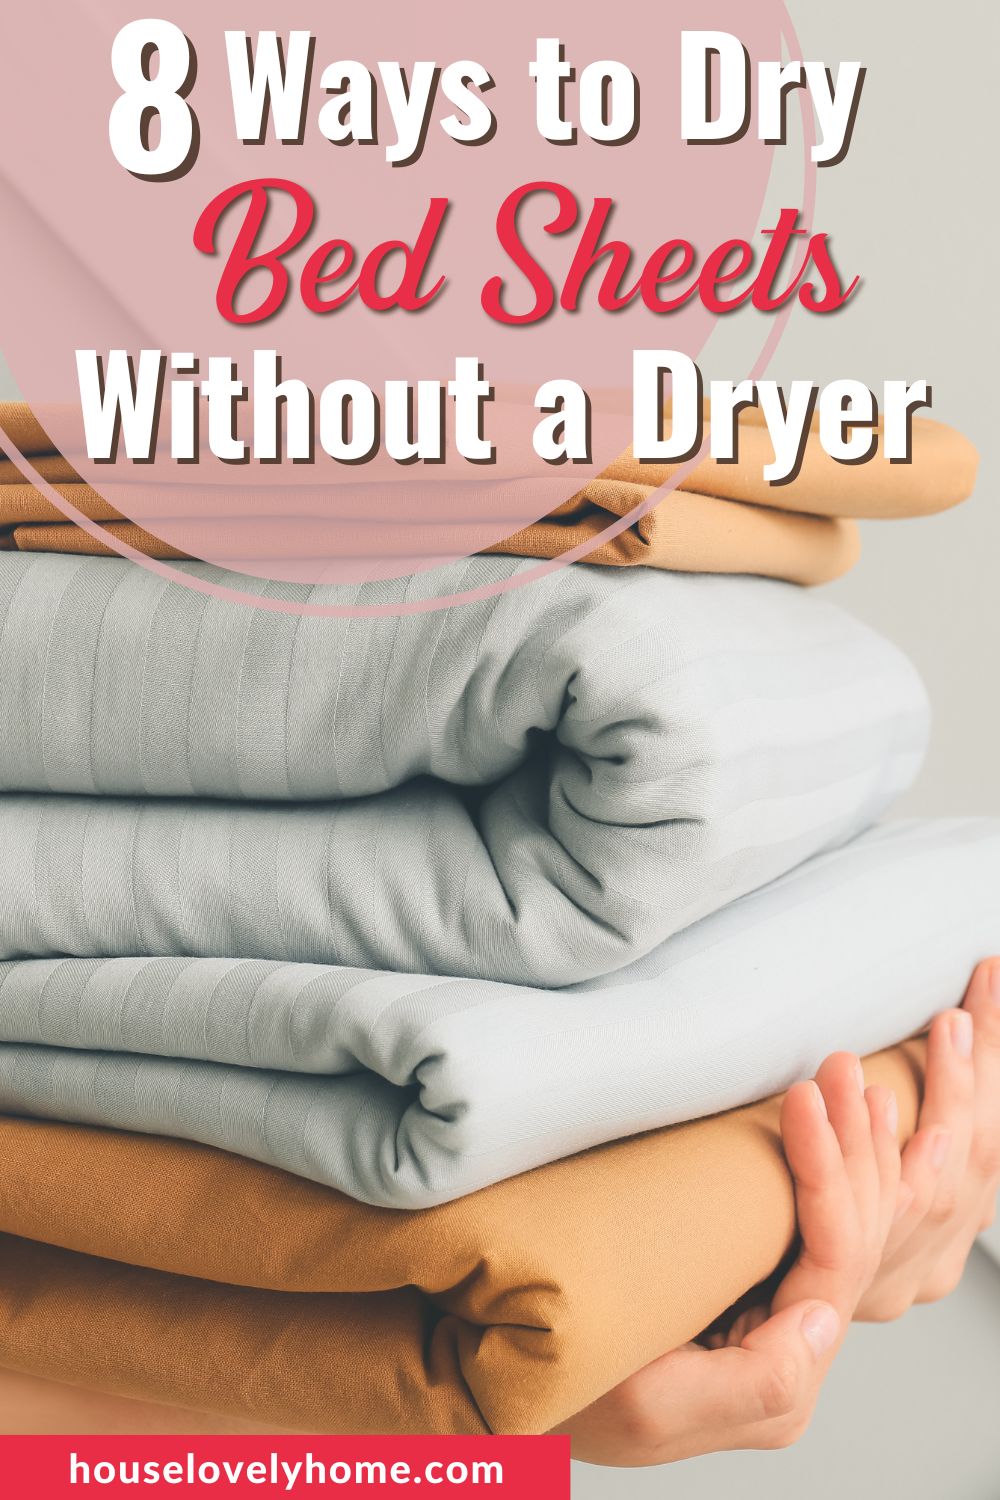 Folded clean white and brown bedsheets held by hands and text overlays that read 8 Ways to Dry Bed Sheets Without a Dryer